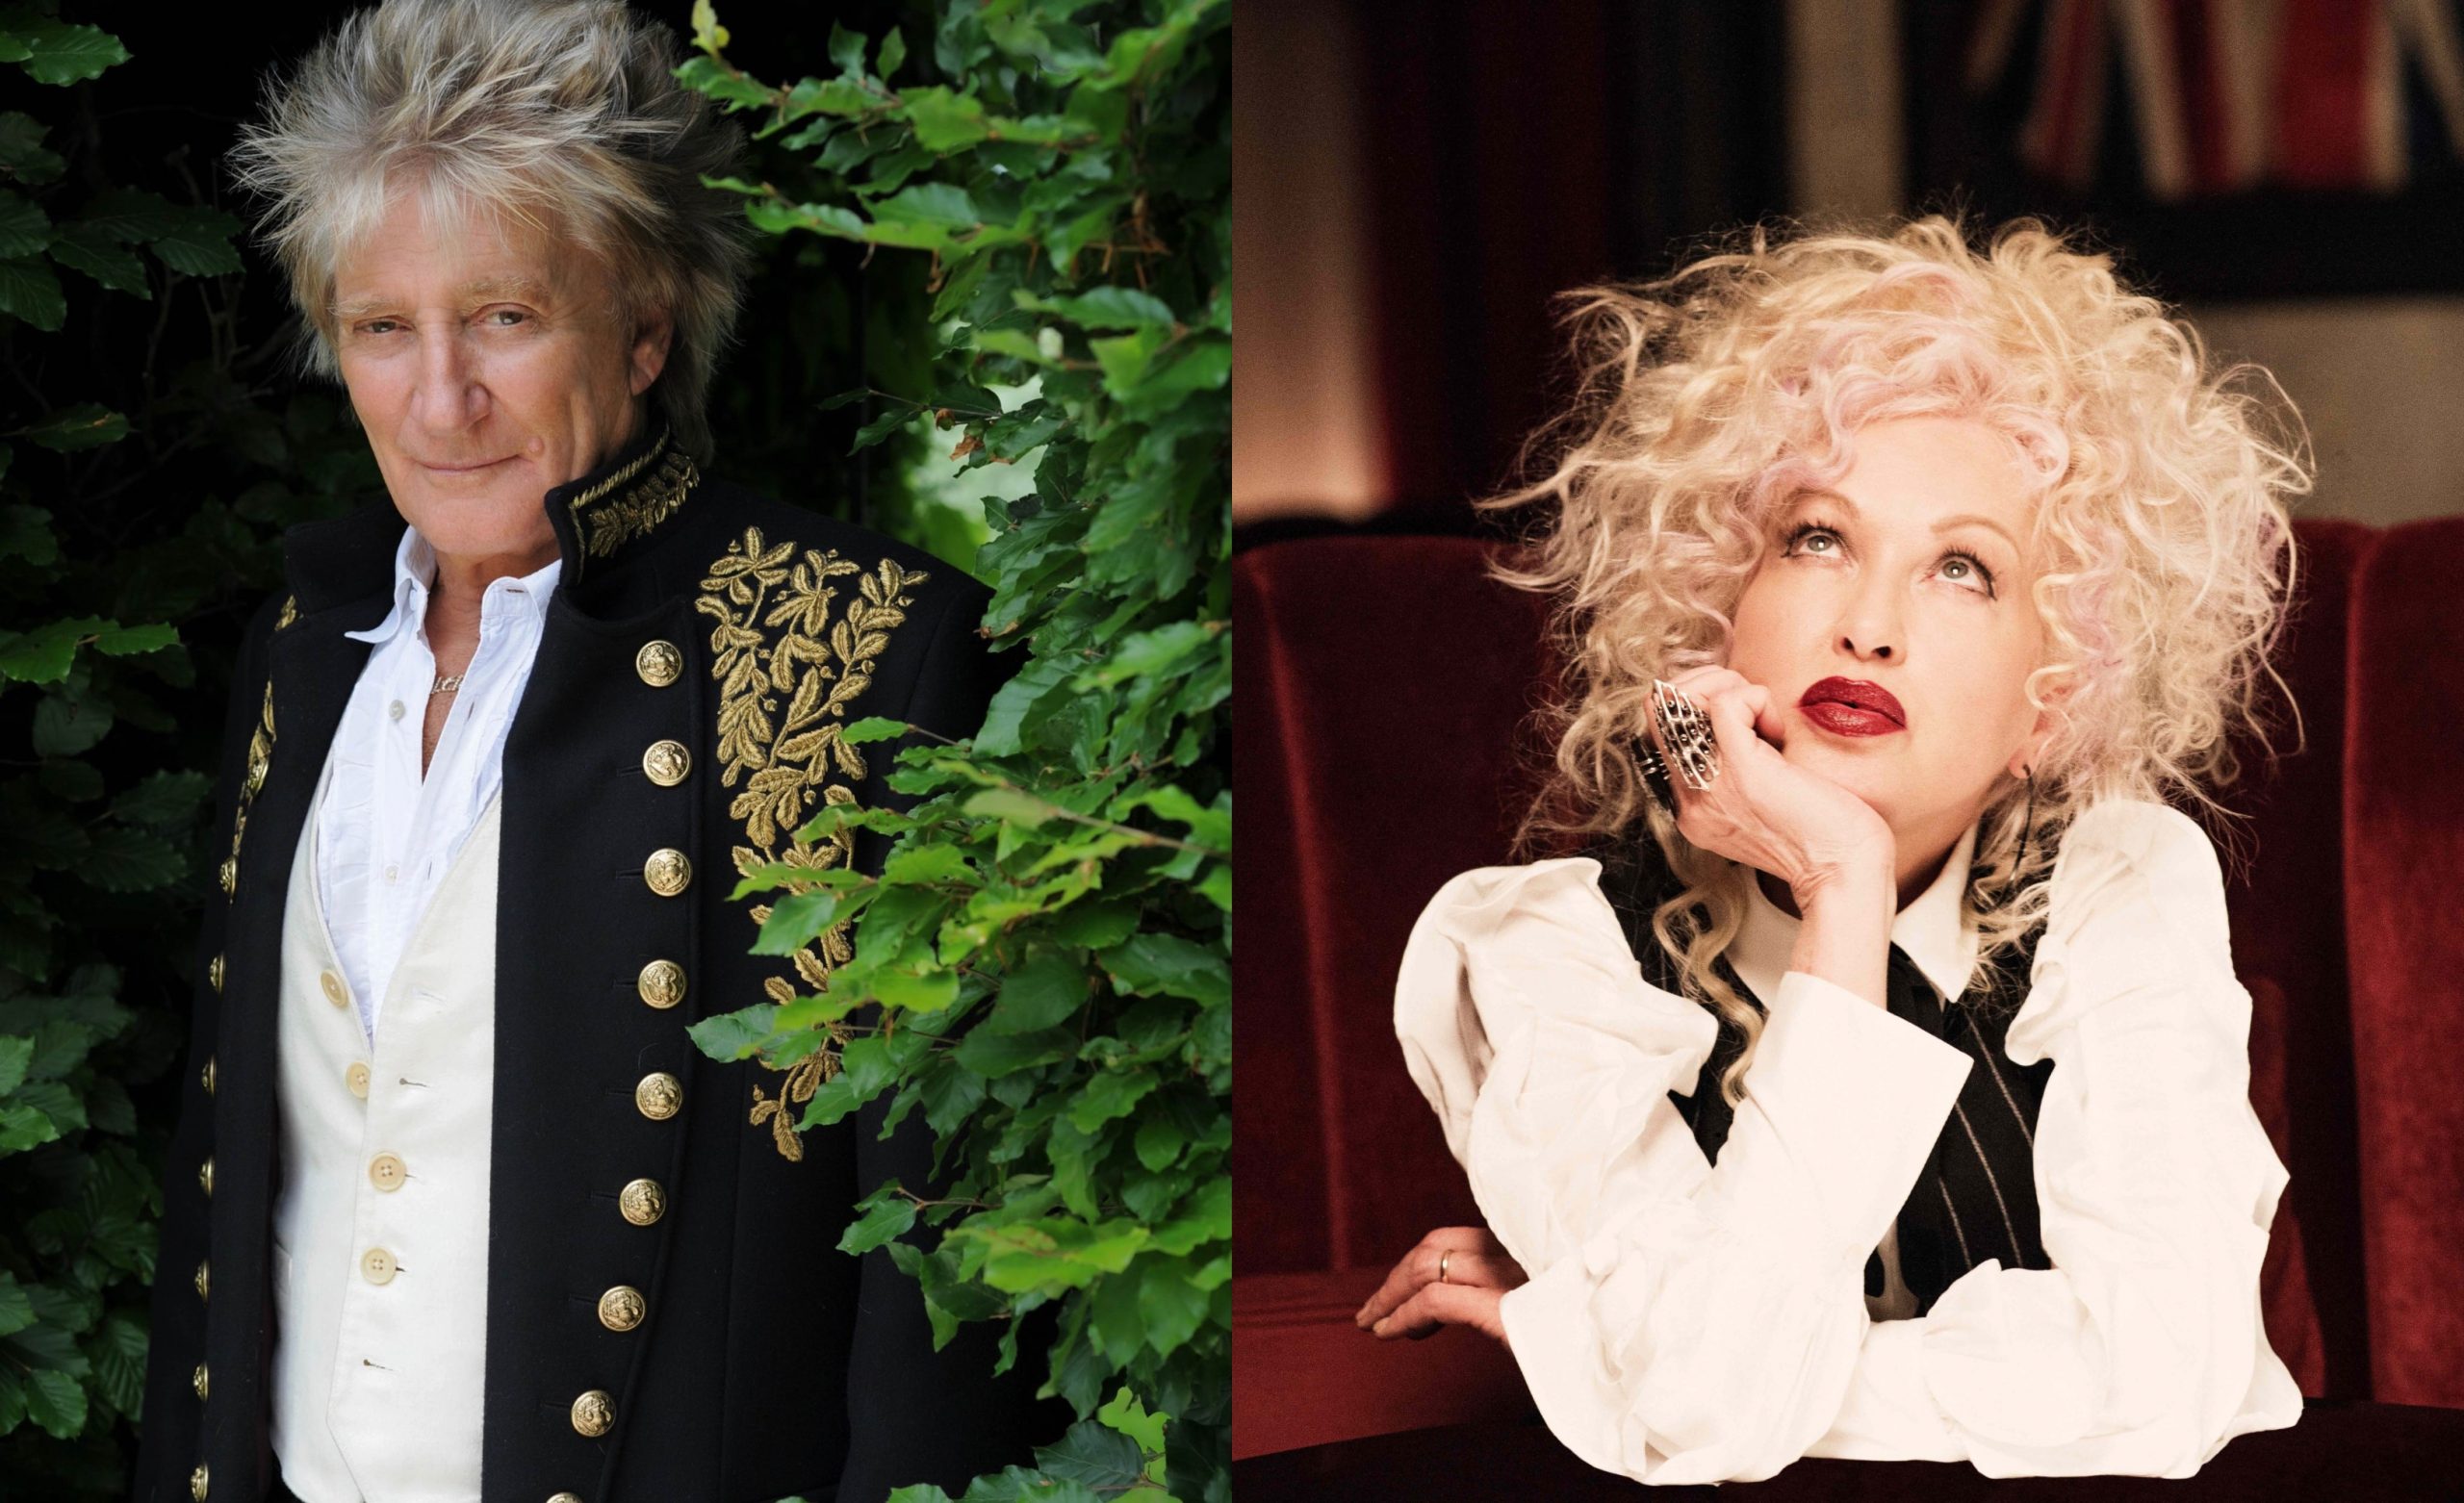 Rod Stewart and Cyndi Lauper team up for huge Australian tour in 2023